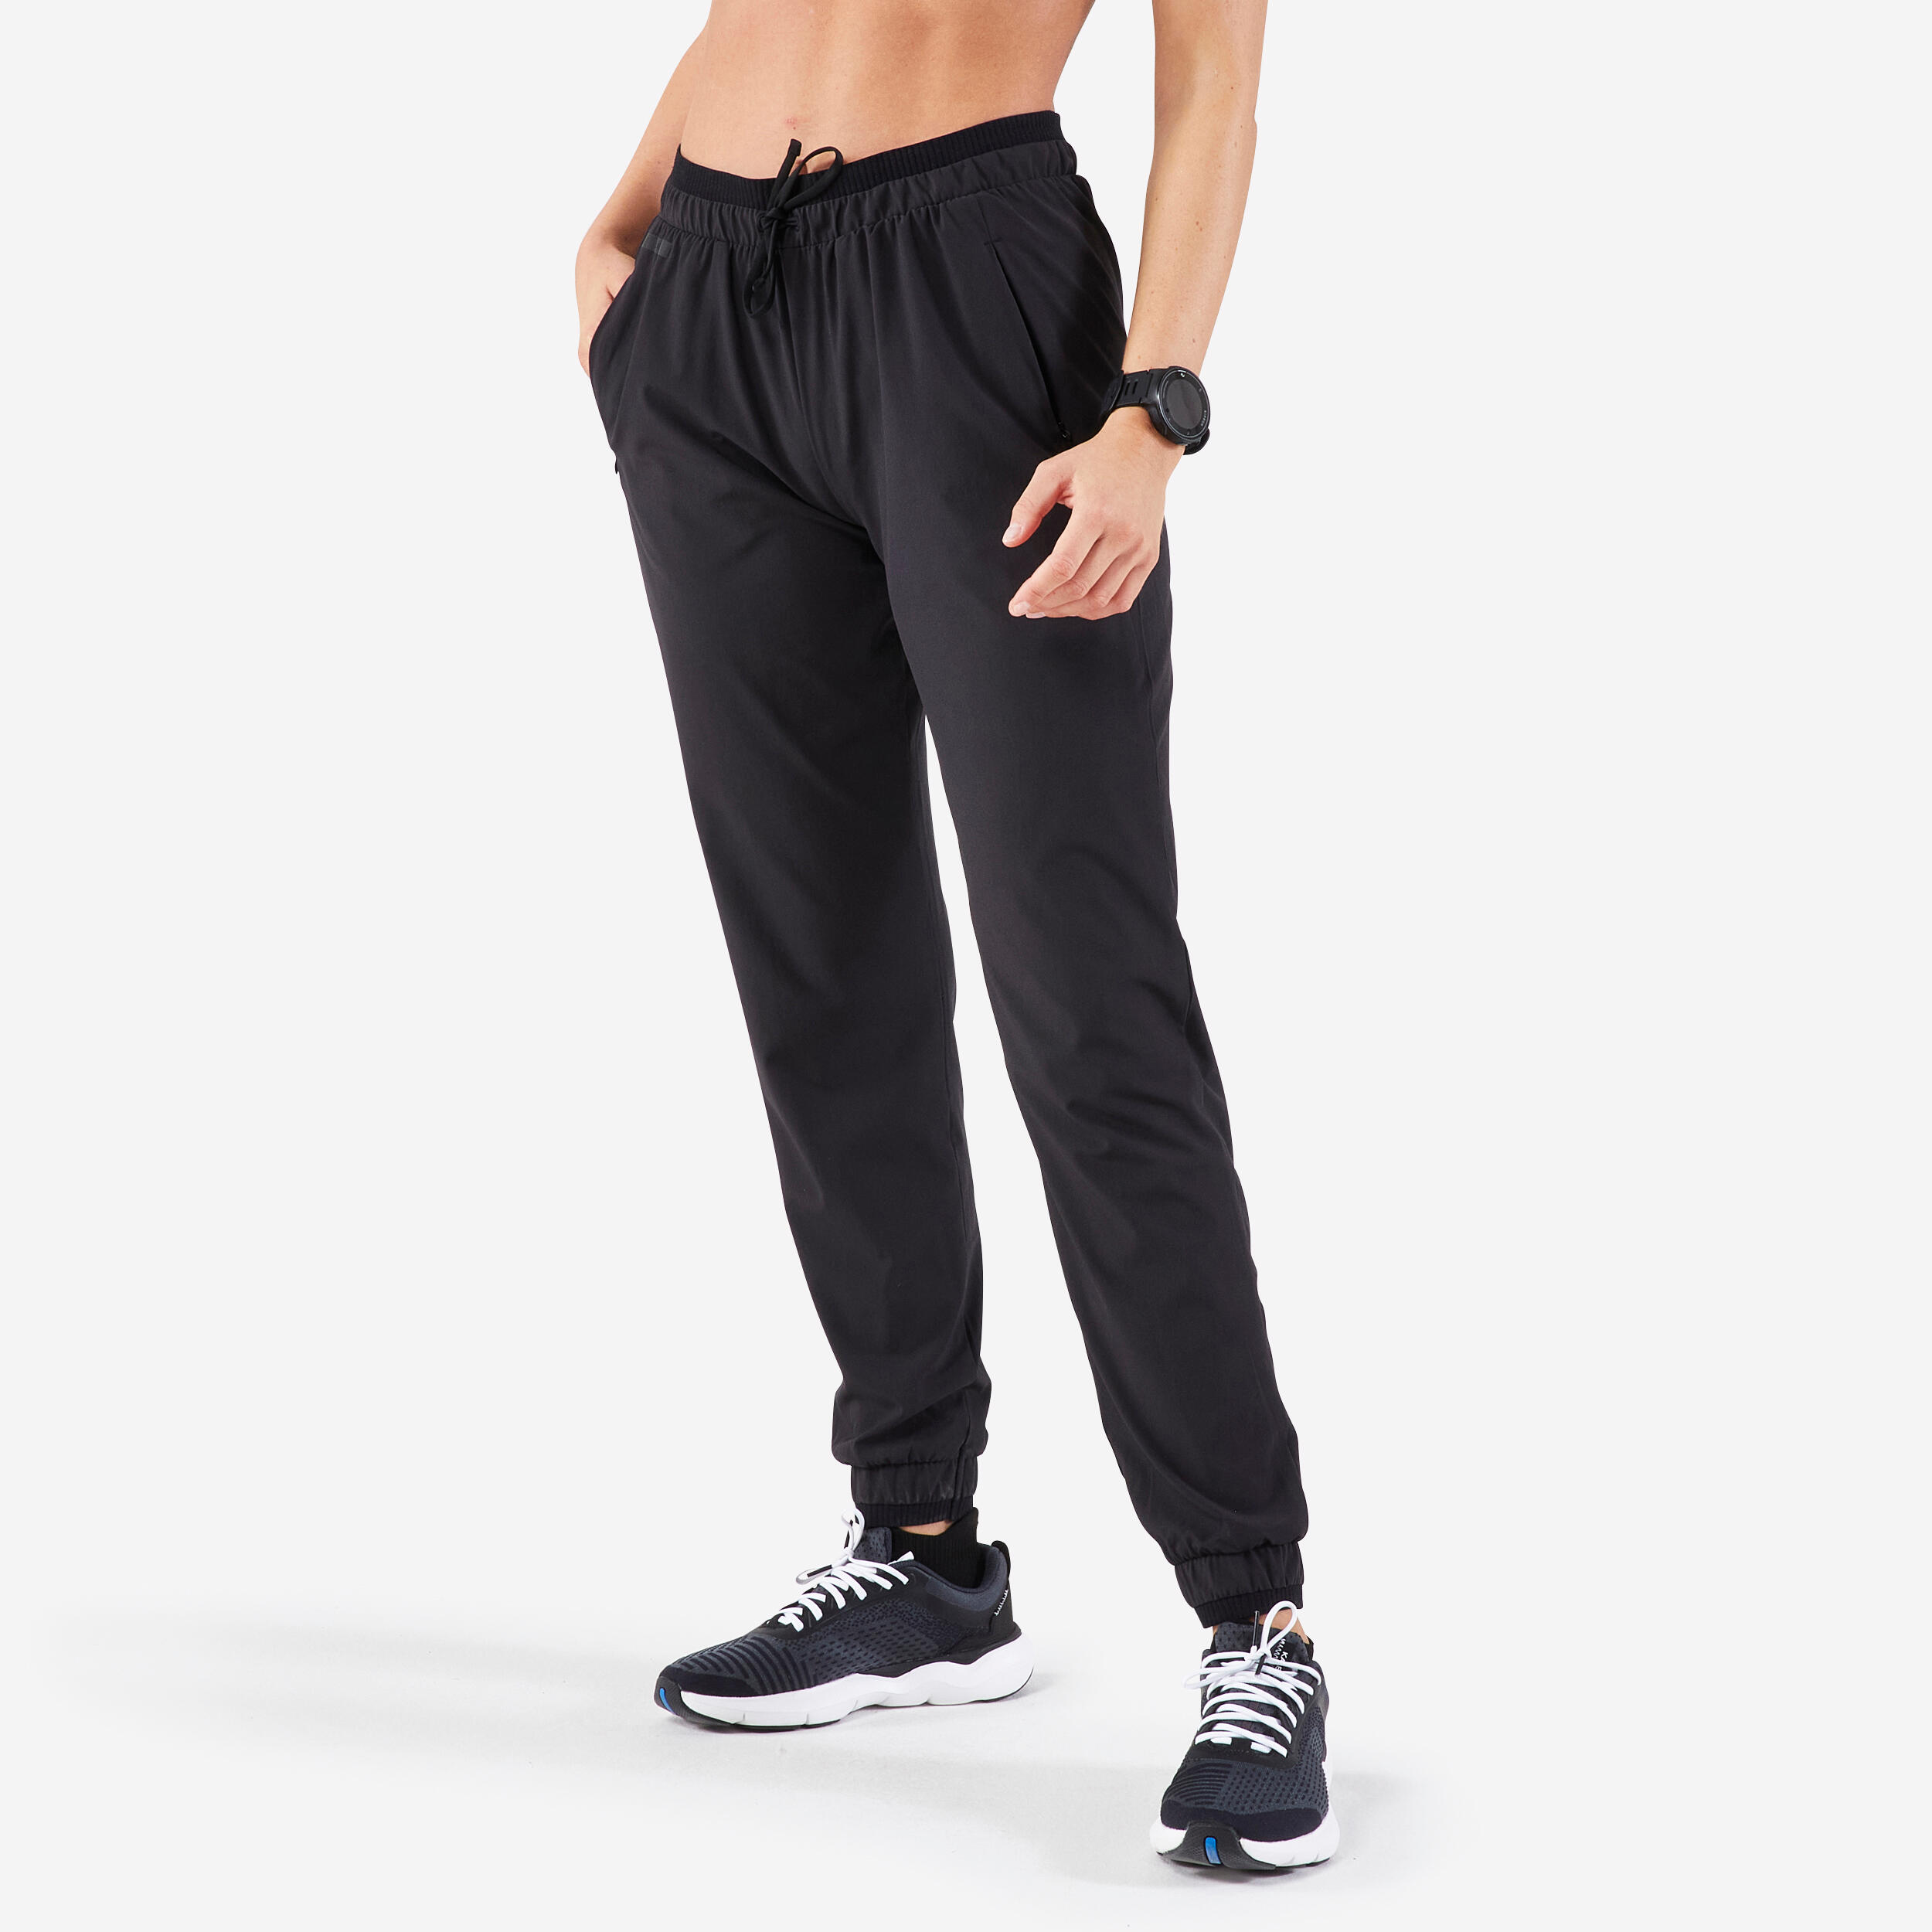 Women's Quick Dry Dri Fit Yoga Athletic Pants, Joggers for Running